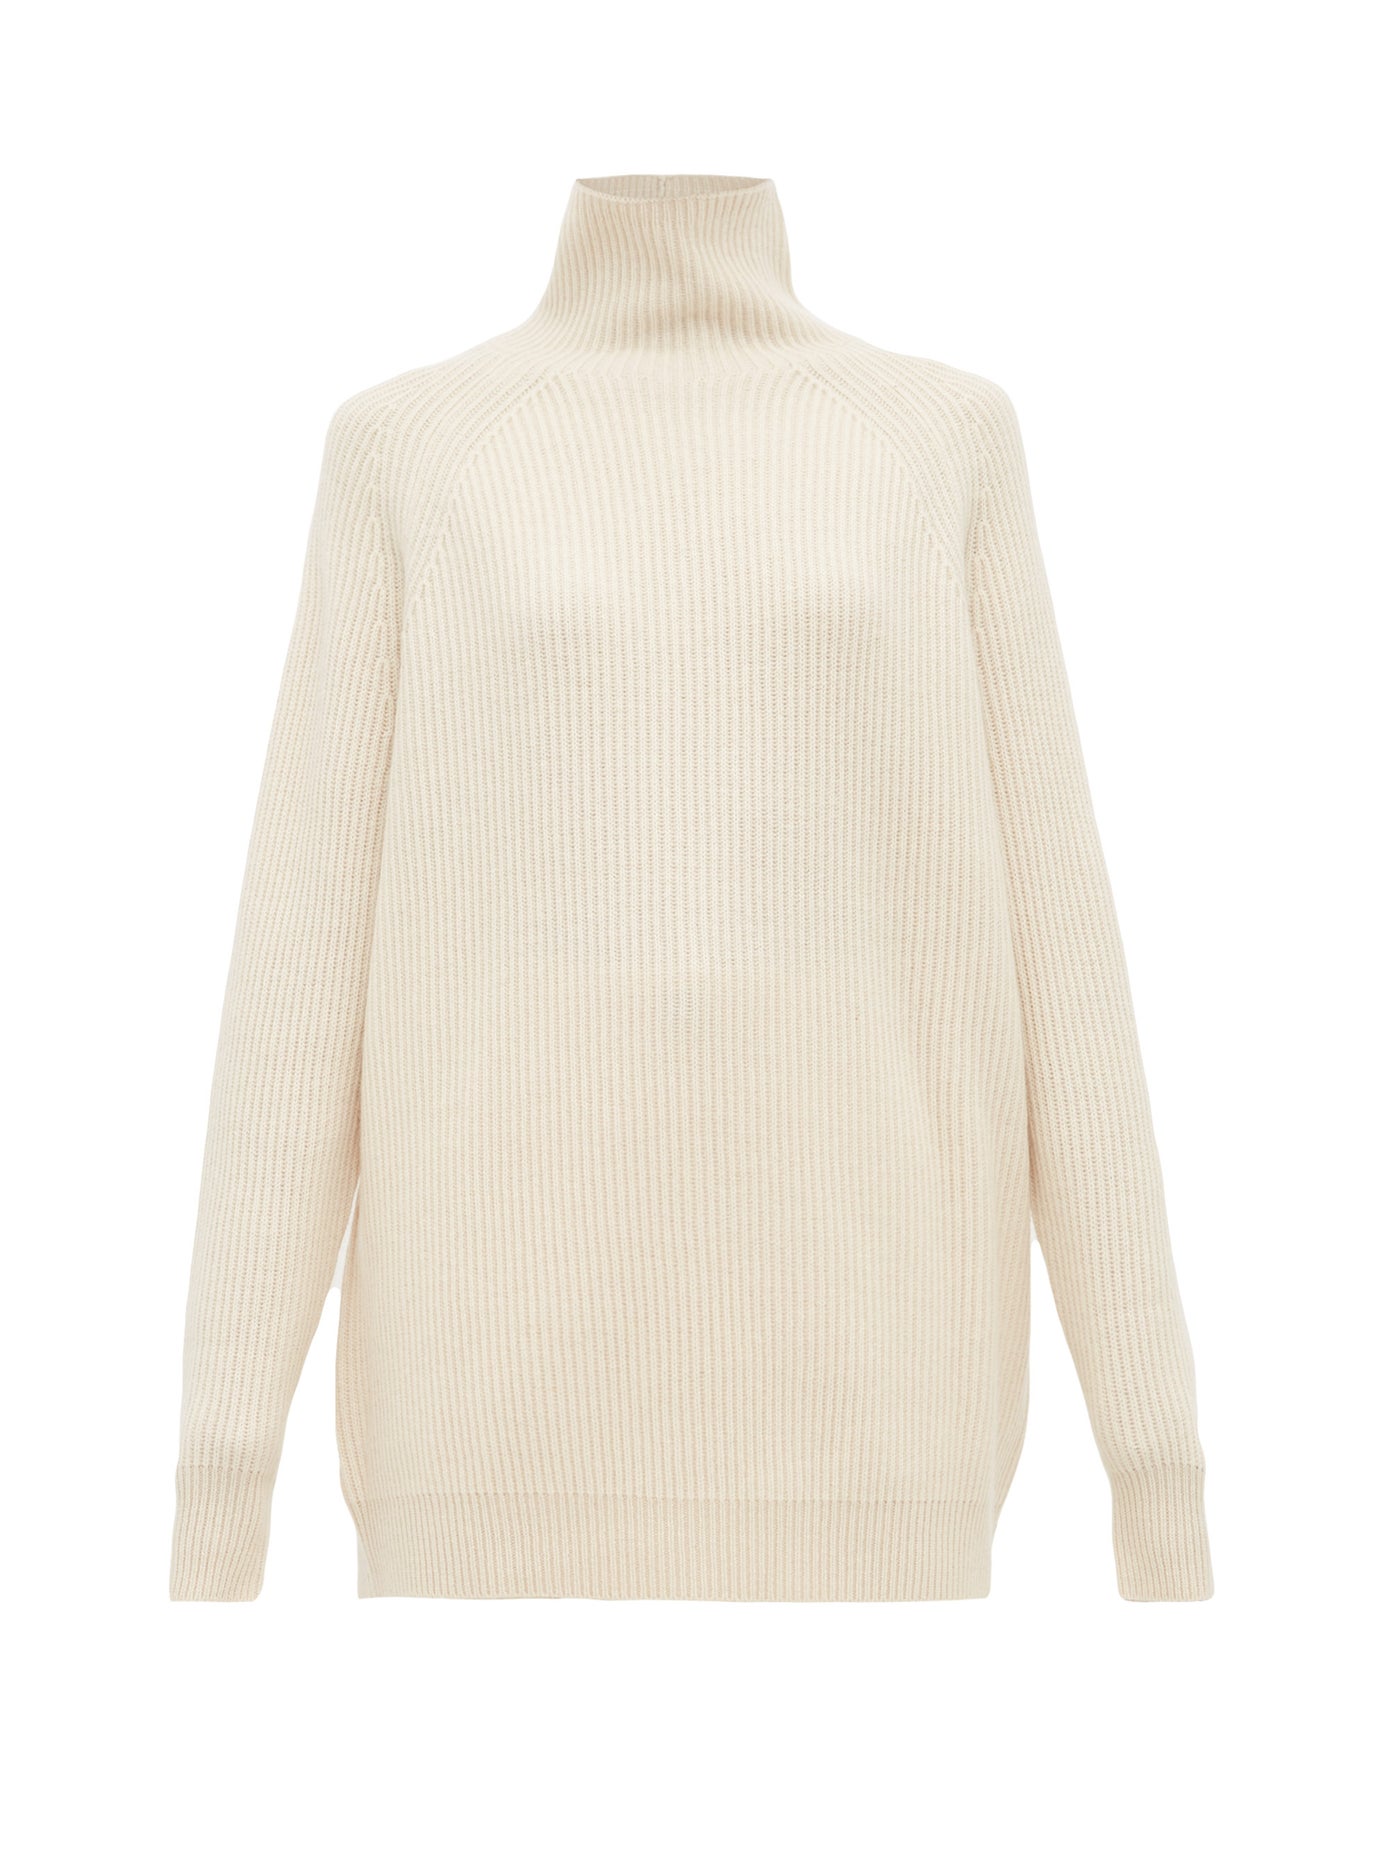 Max Mara - Disco Sweater | ABOUT ICONS